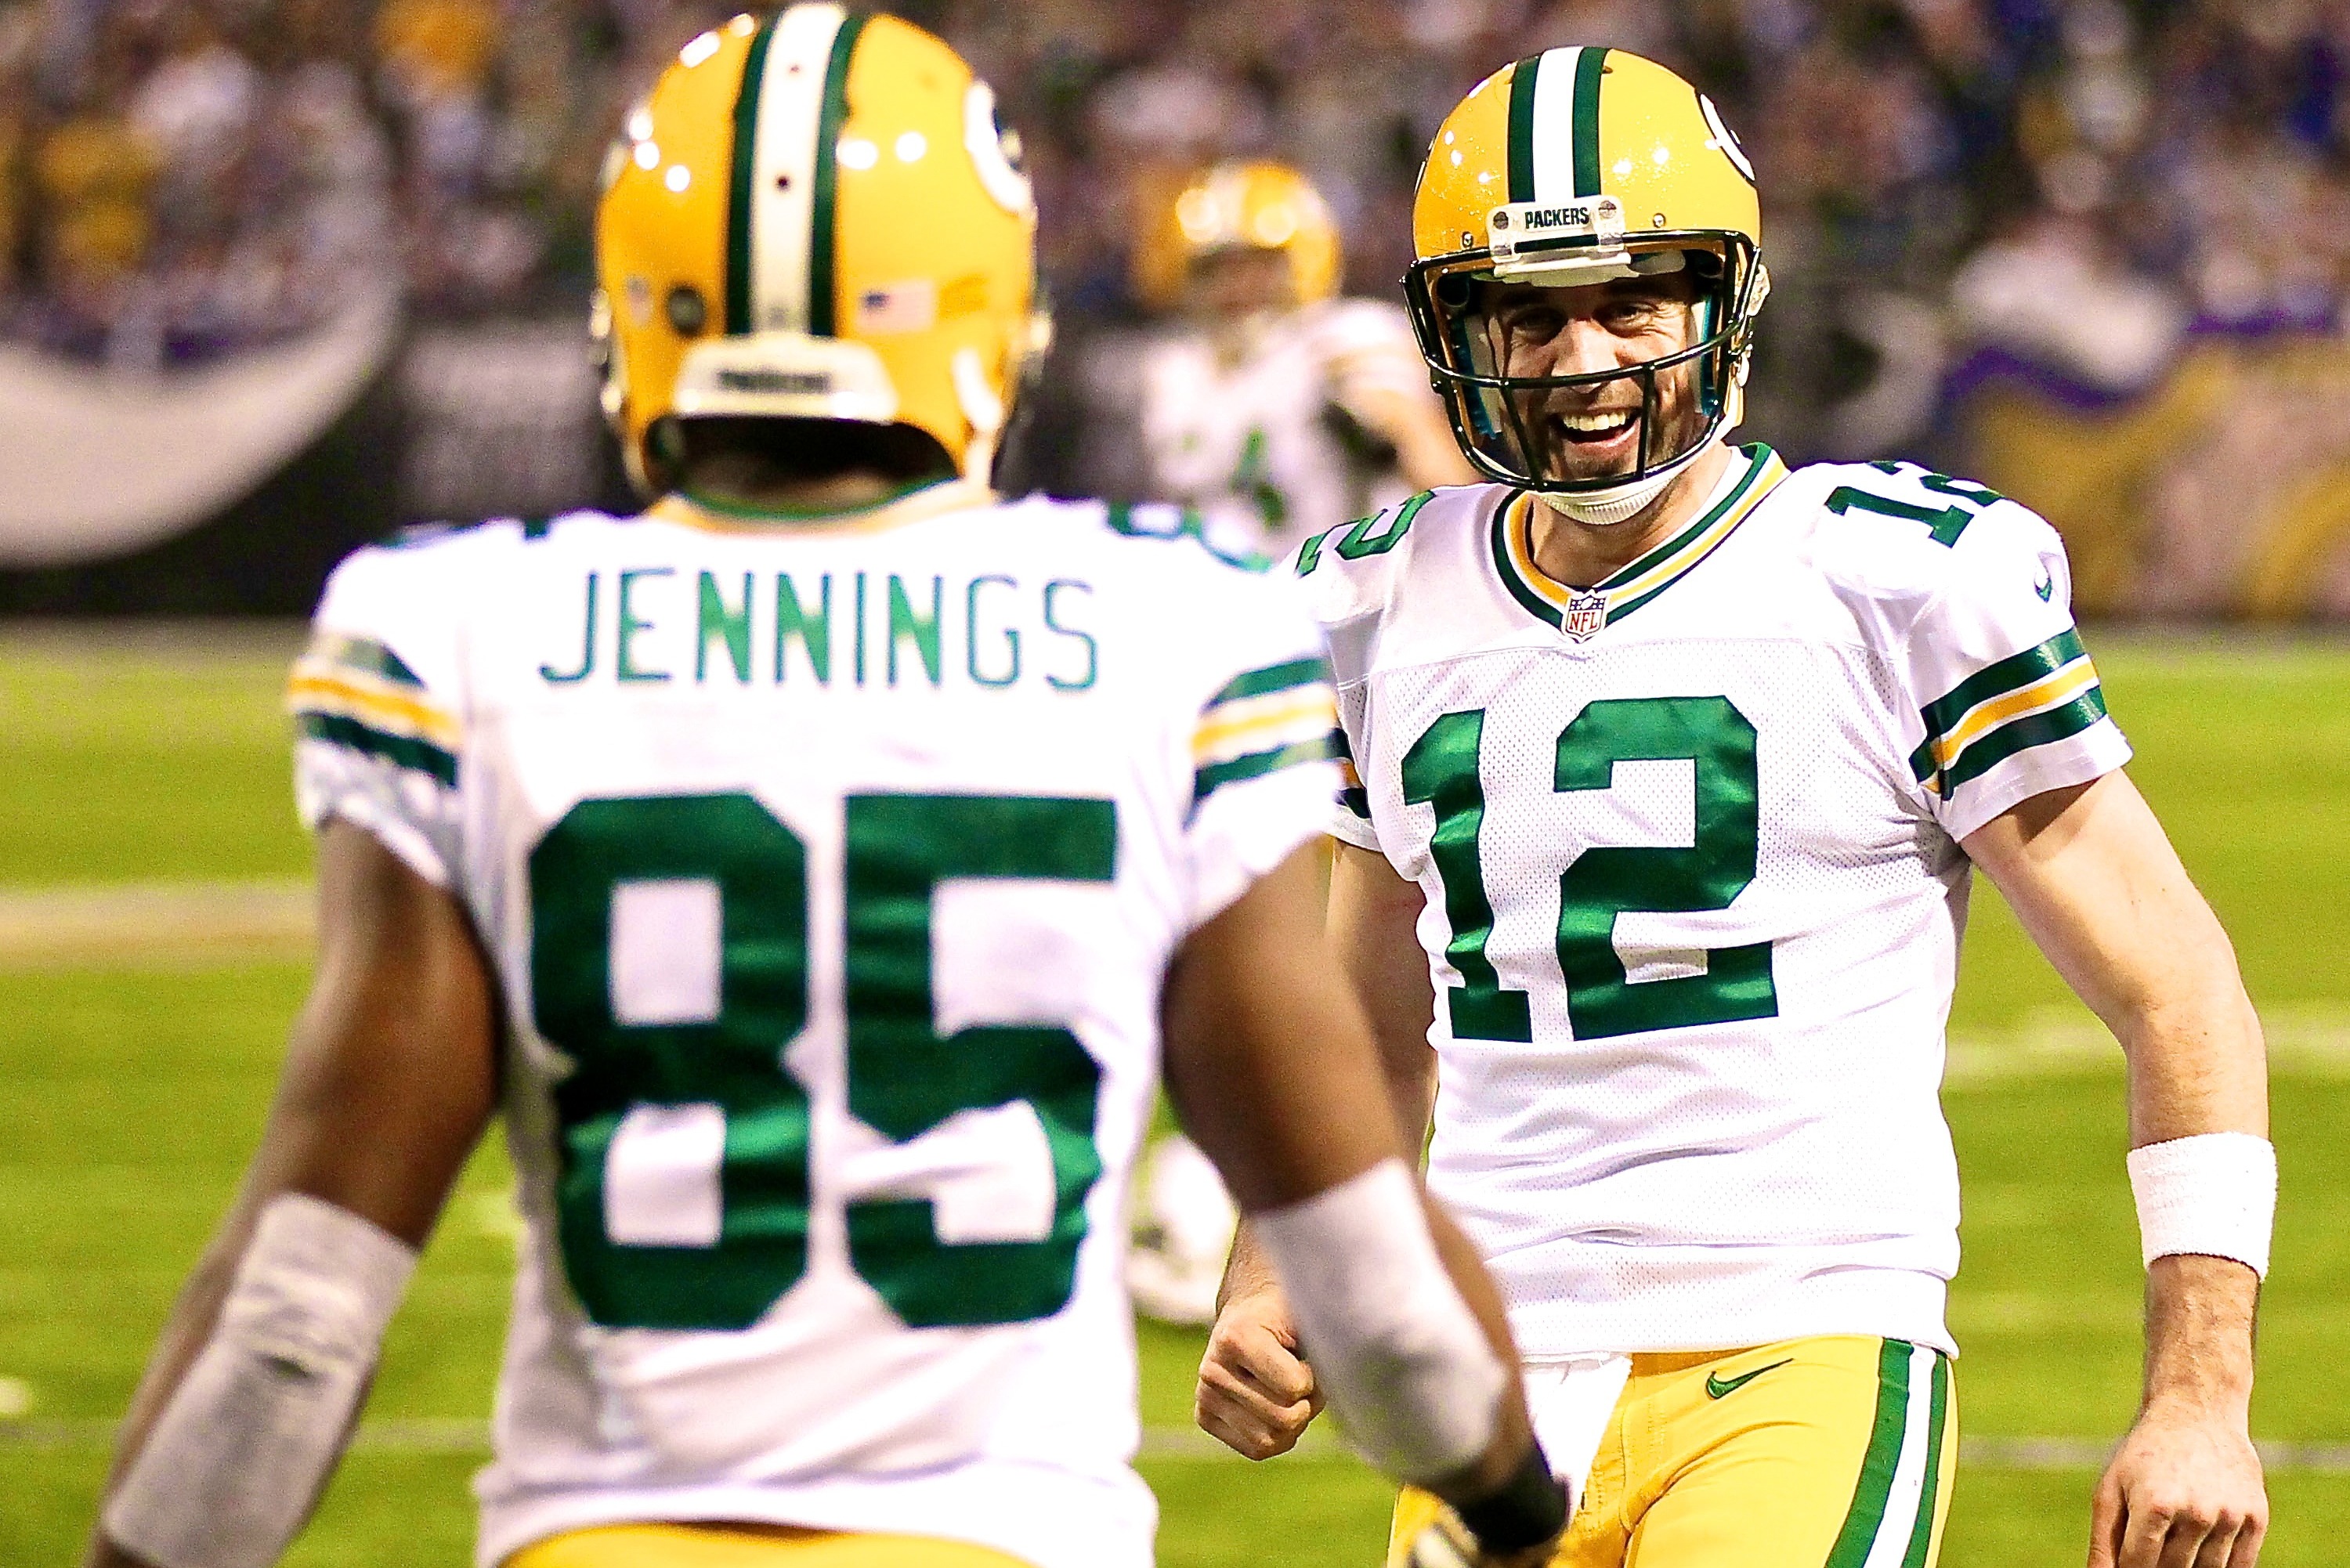 Nov 21, 2010; Minneapolis, MN, USA; Green Bay Packers wide receiver Greg Jennings (85) celebrates his 22-yard touchdown with quarterback Aaron Rodgers (12) against the Minnesota Vikings in the fourth quarter at the Metrodome. The Packers win 31-3. Mandatory Credit: Bruce Kluckhohn-USA TODAY Sports